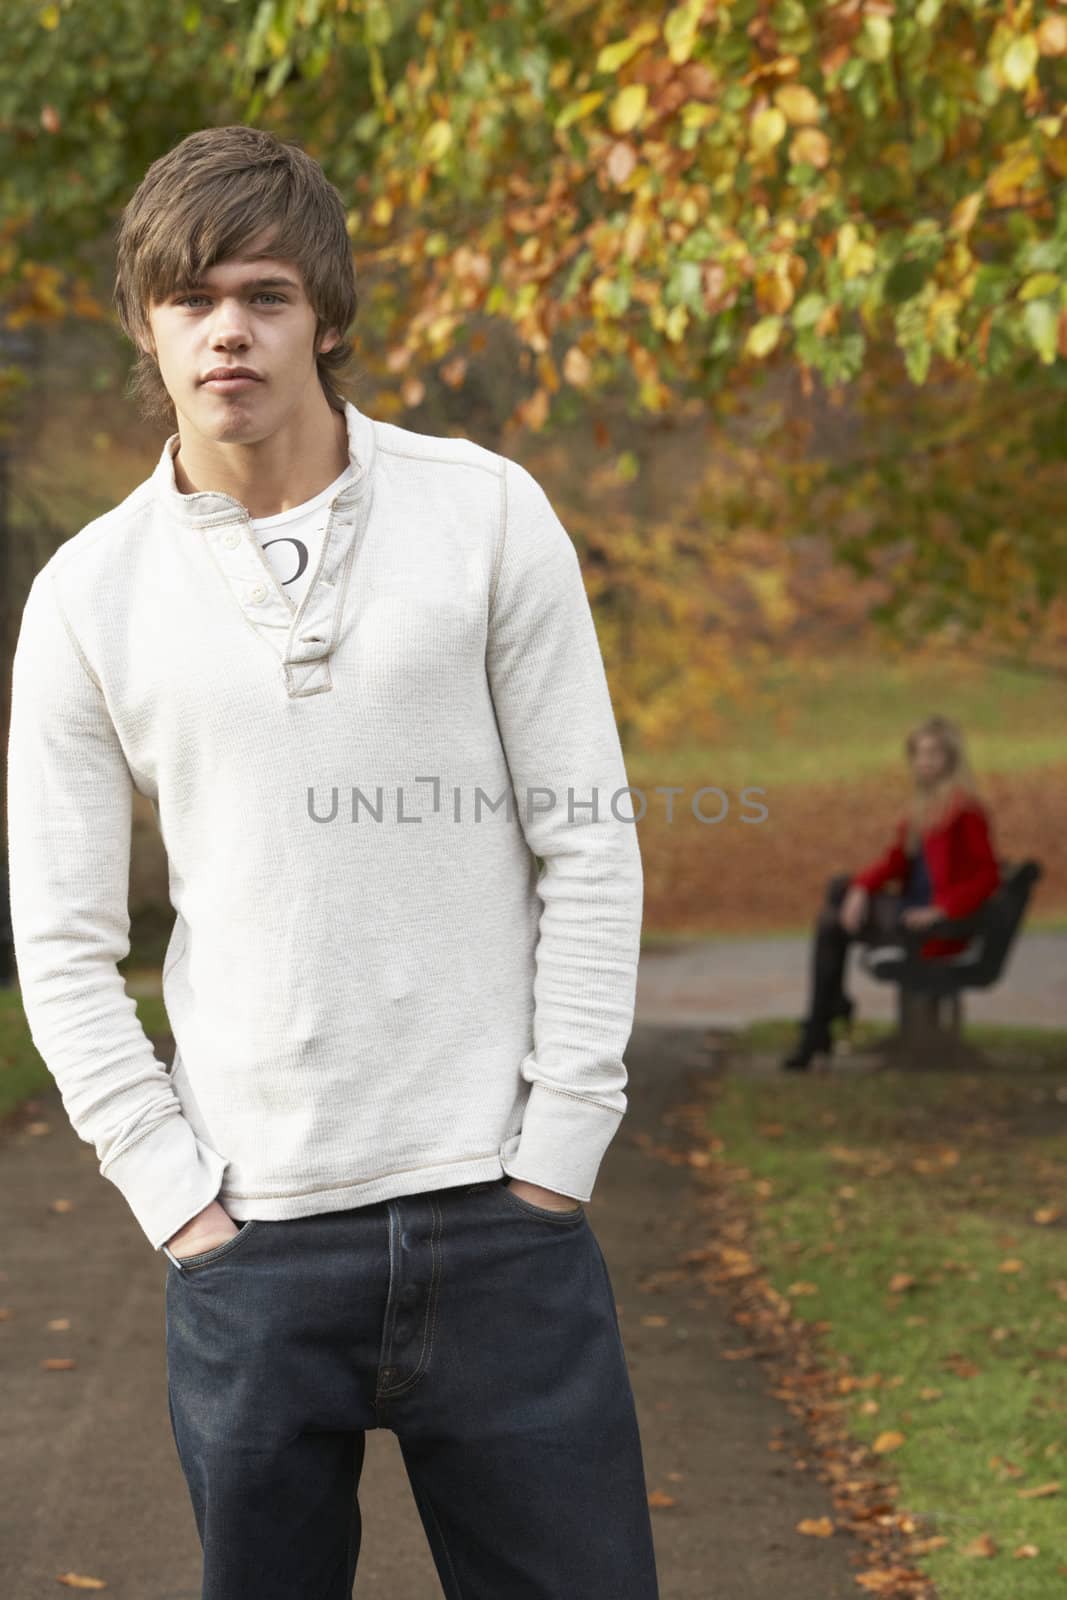 Teenage Boy Standing In Autumn Park With Female Figure On Bench  by omg_images